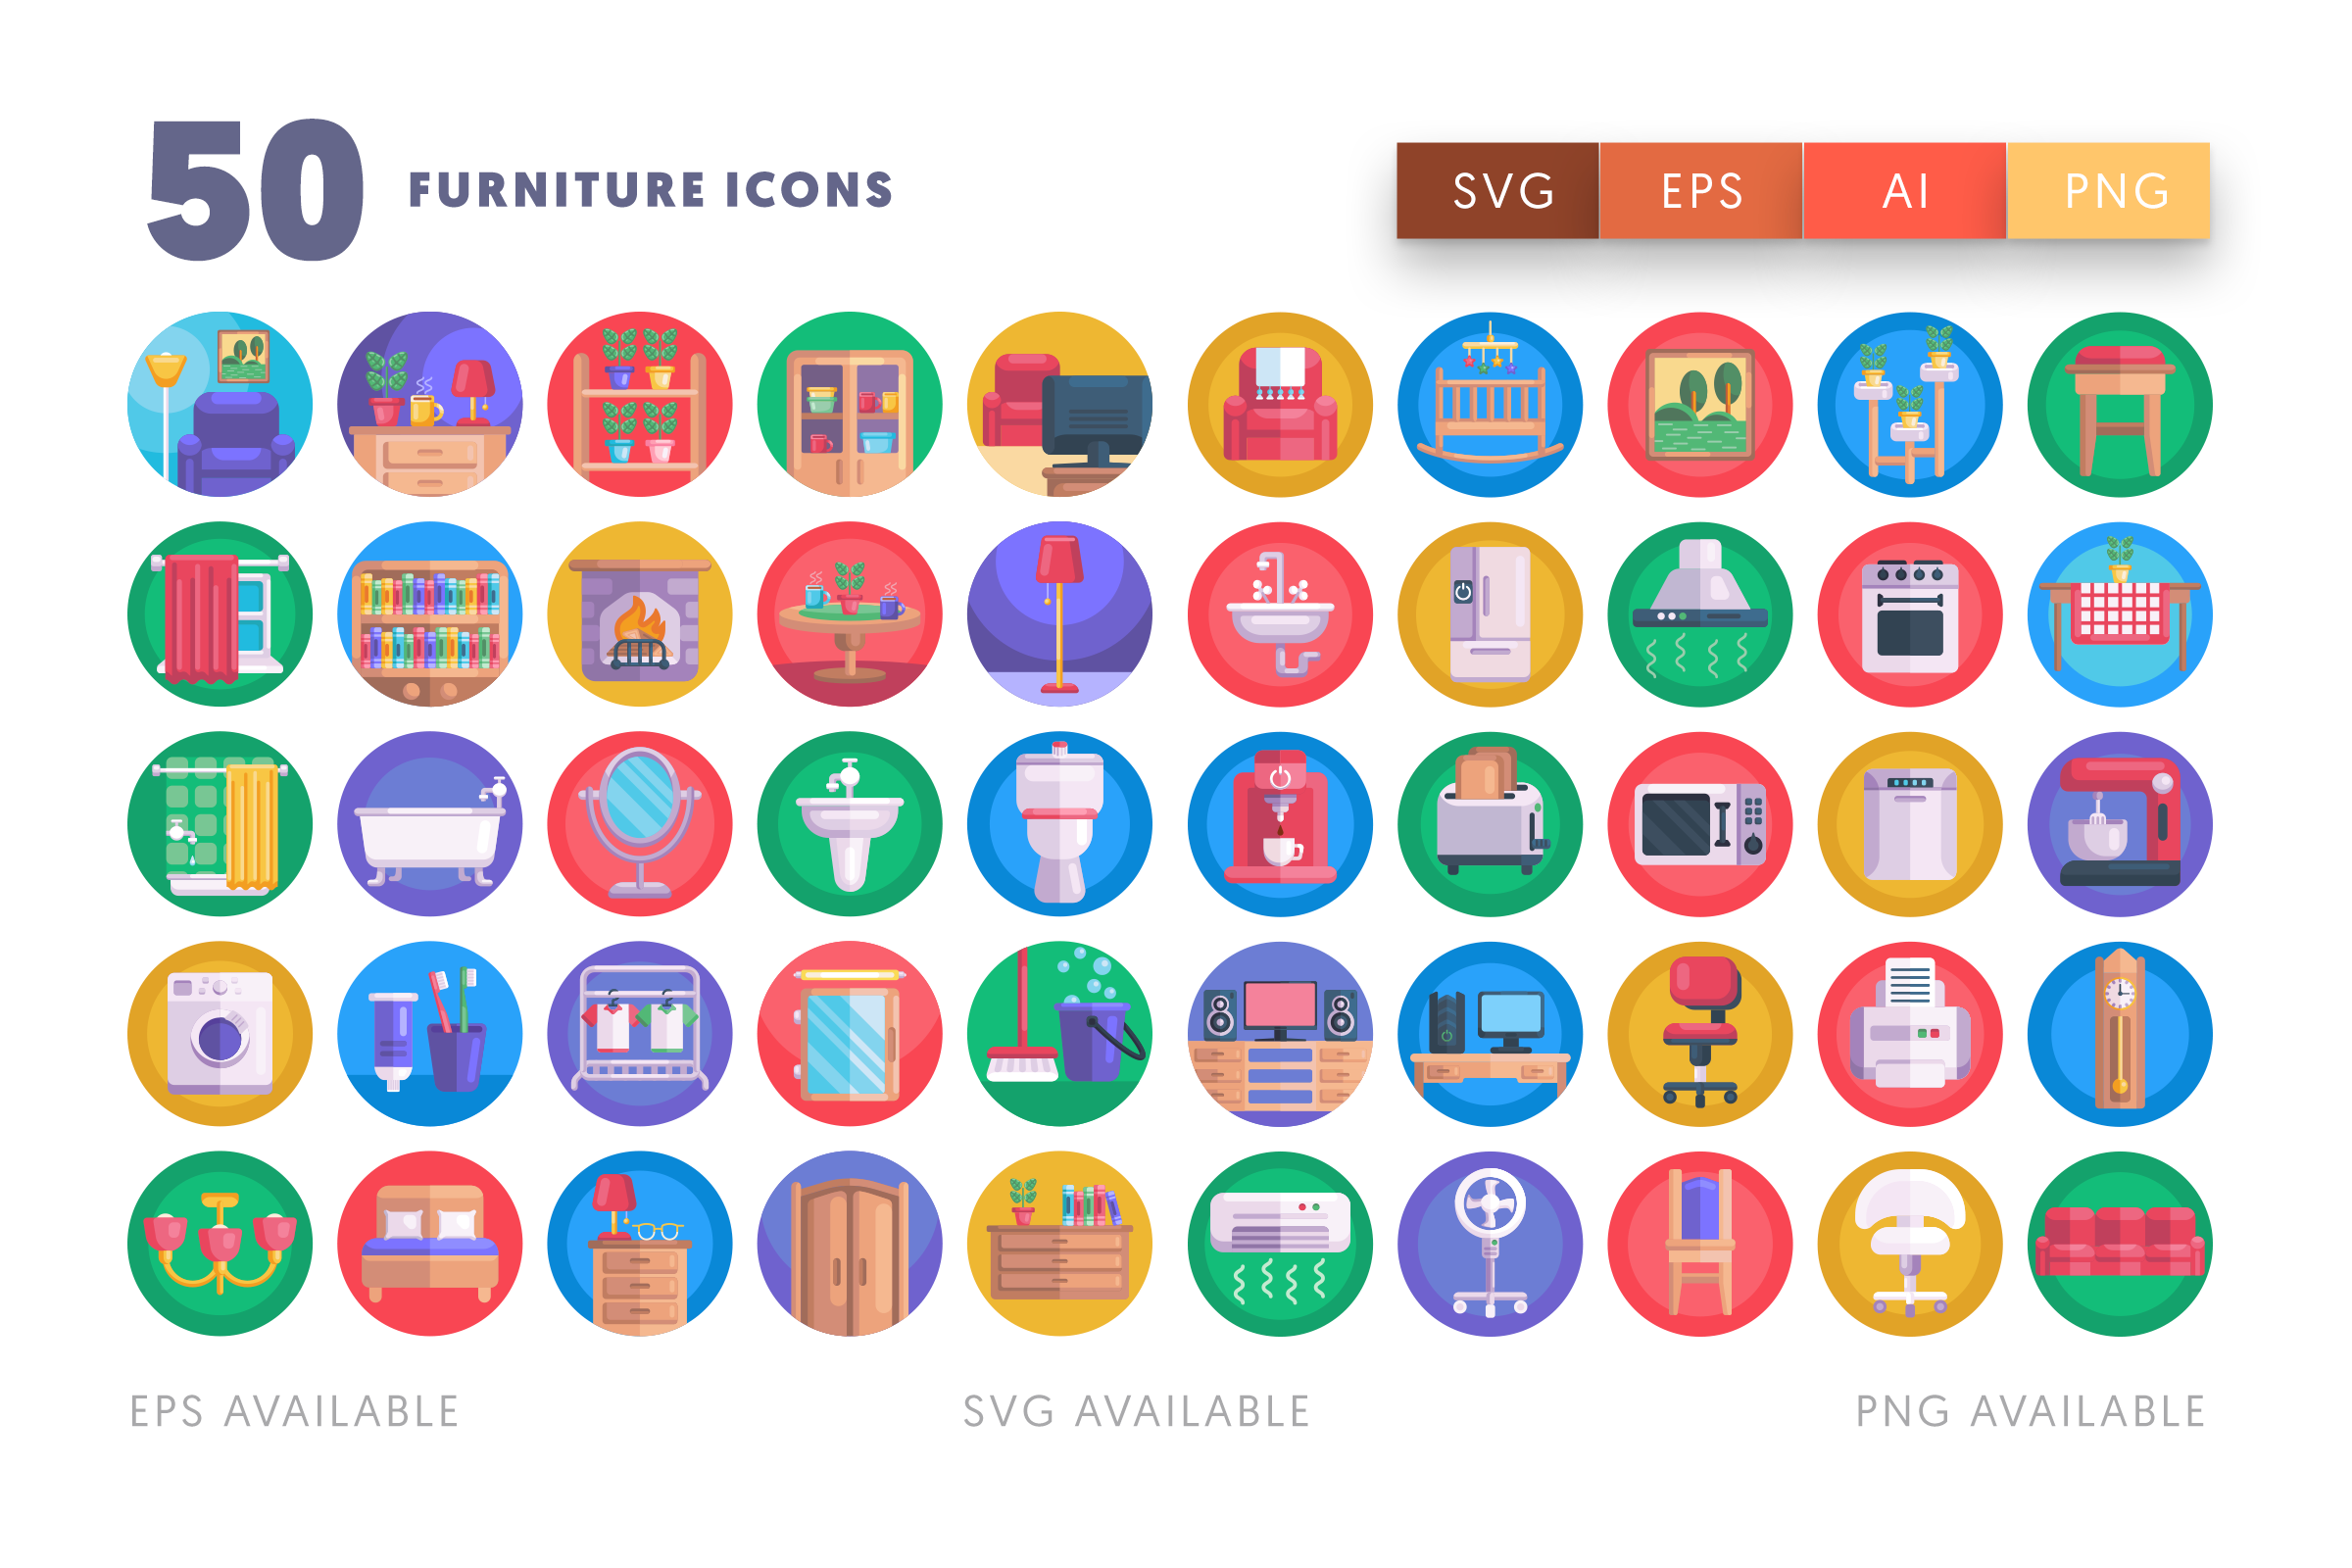 Furniture icons png/svg/eps